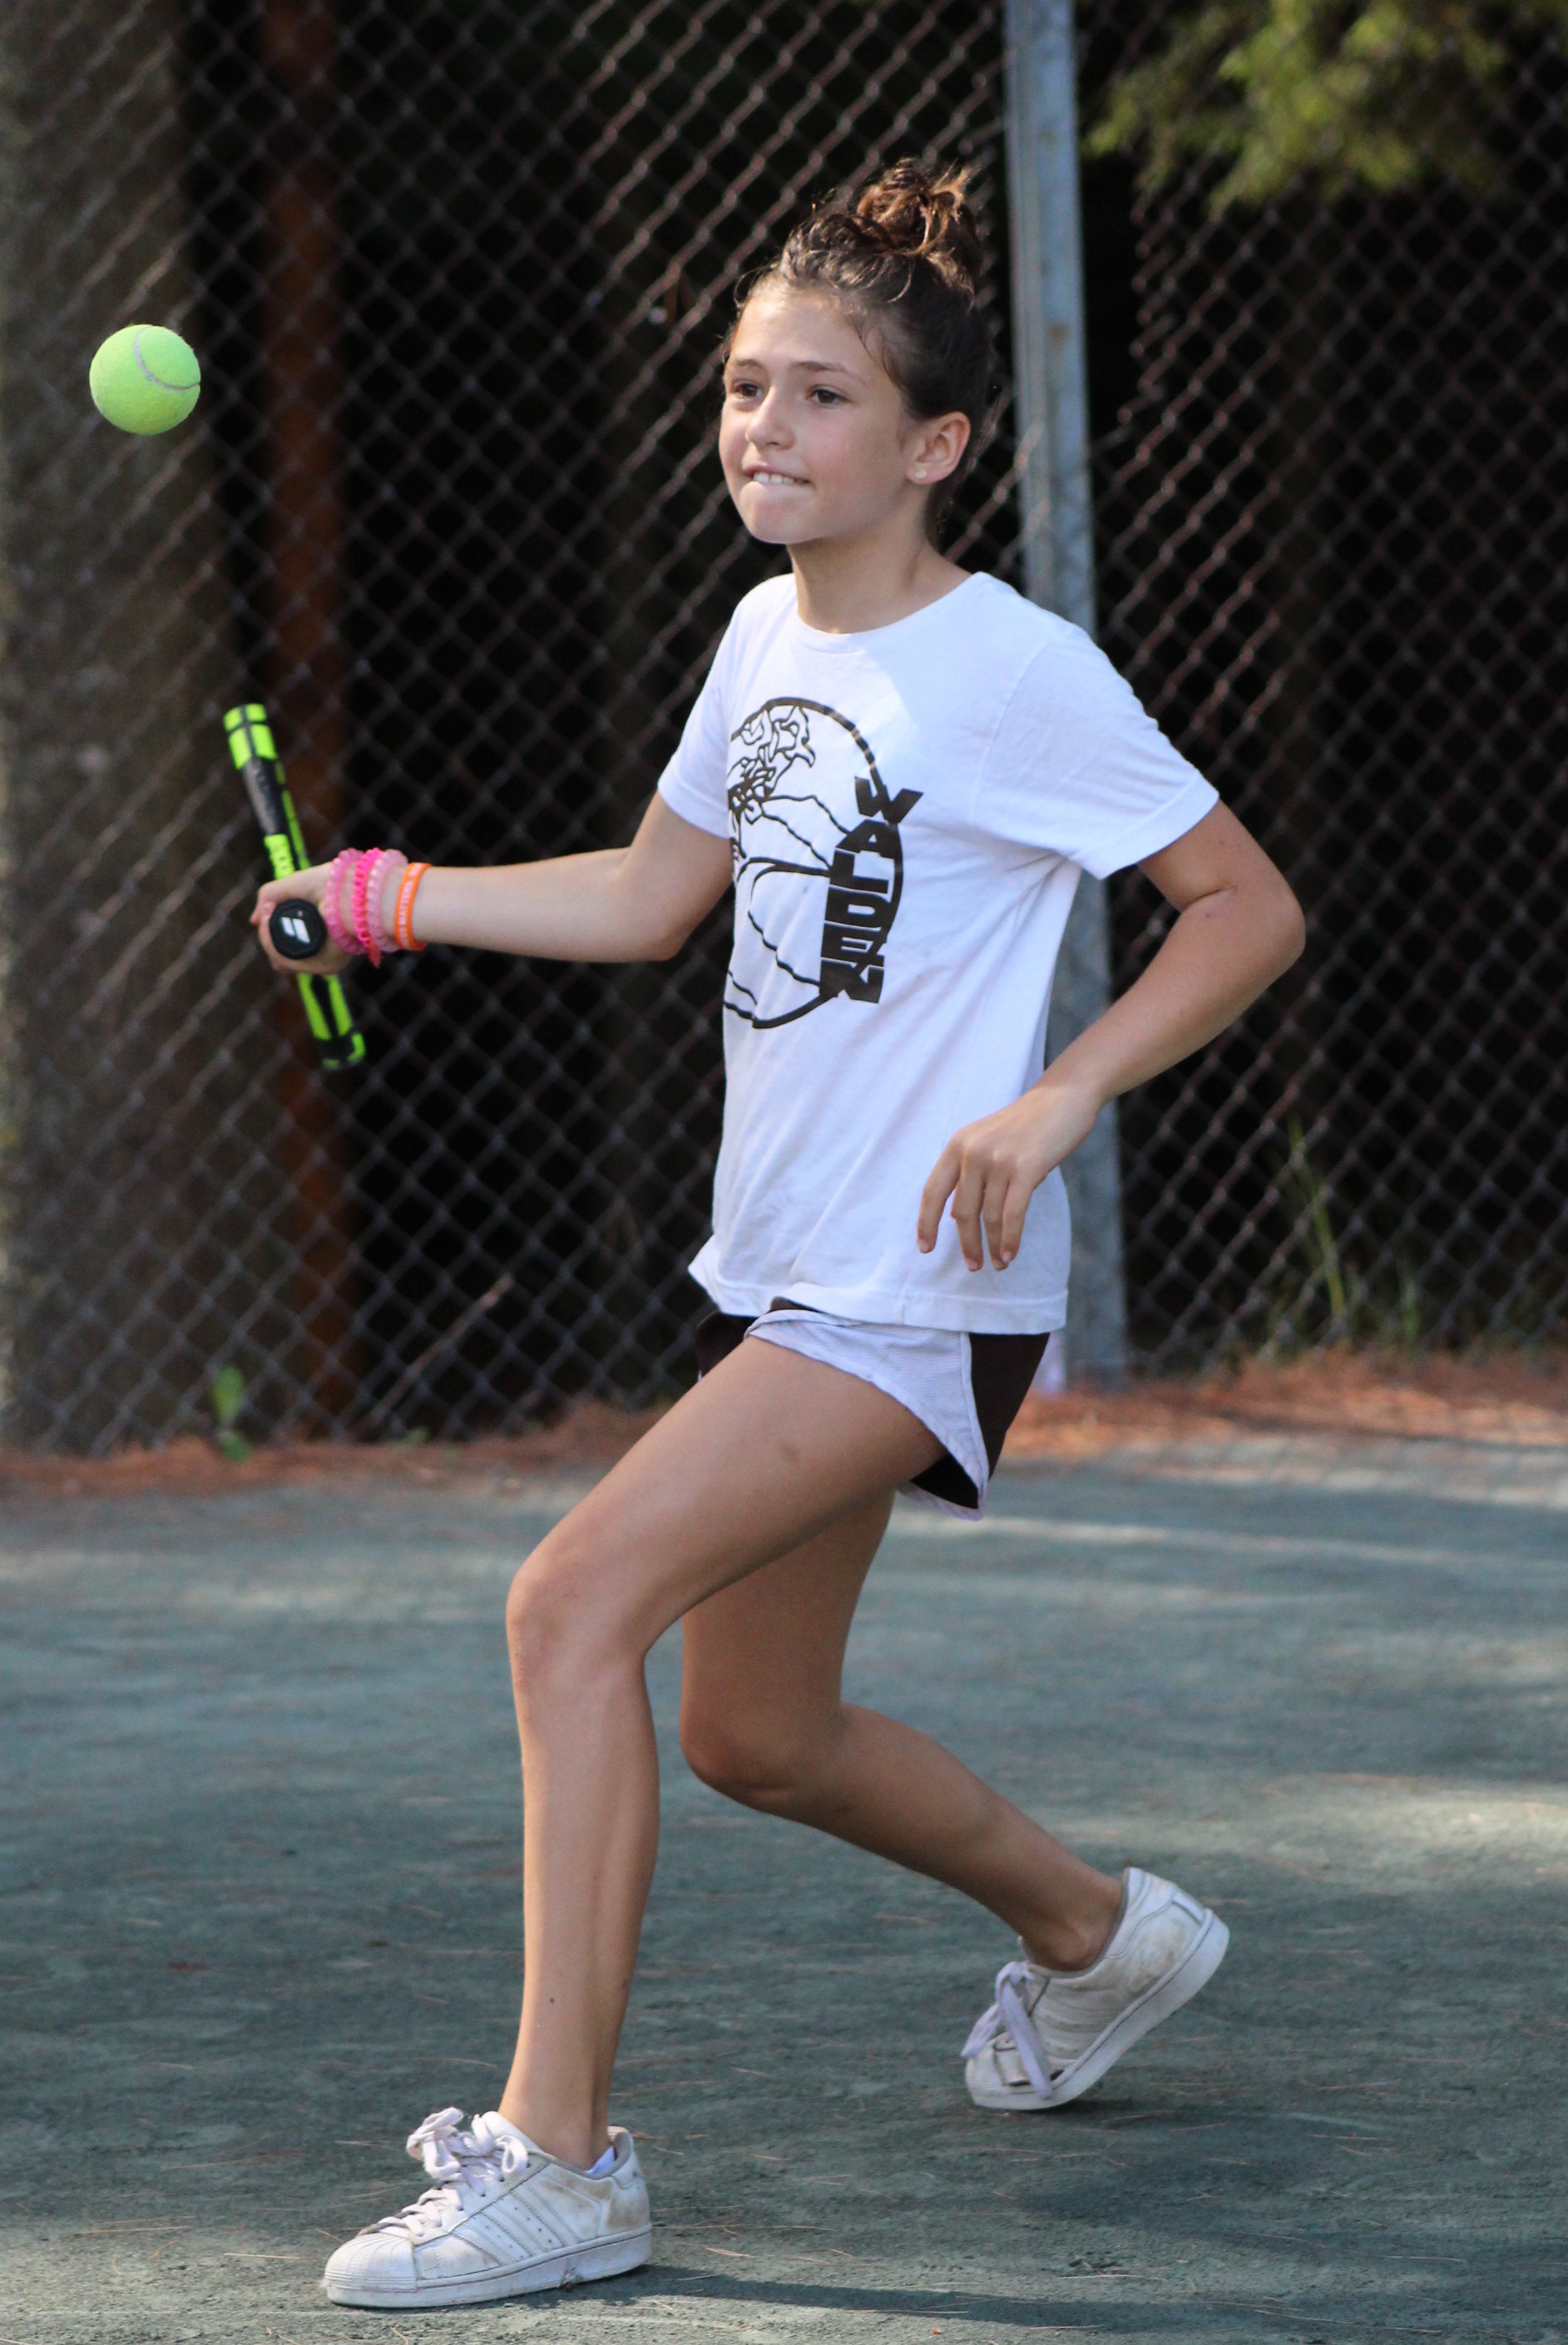 A young camper swings a forehand stroke while playing tennis. 